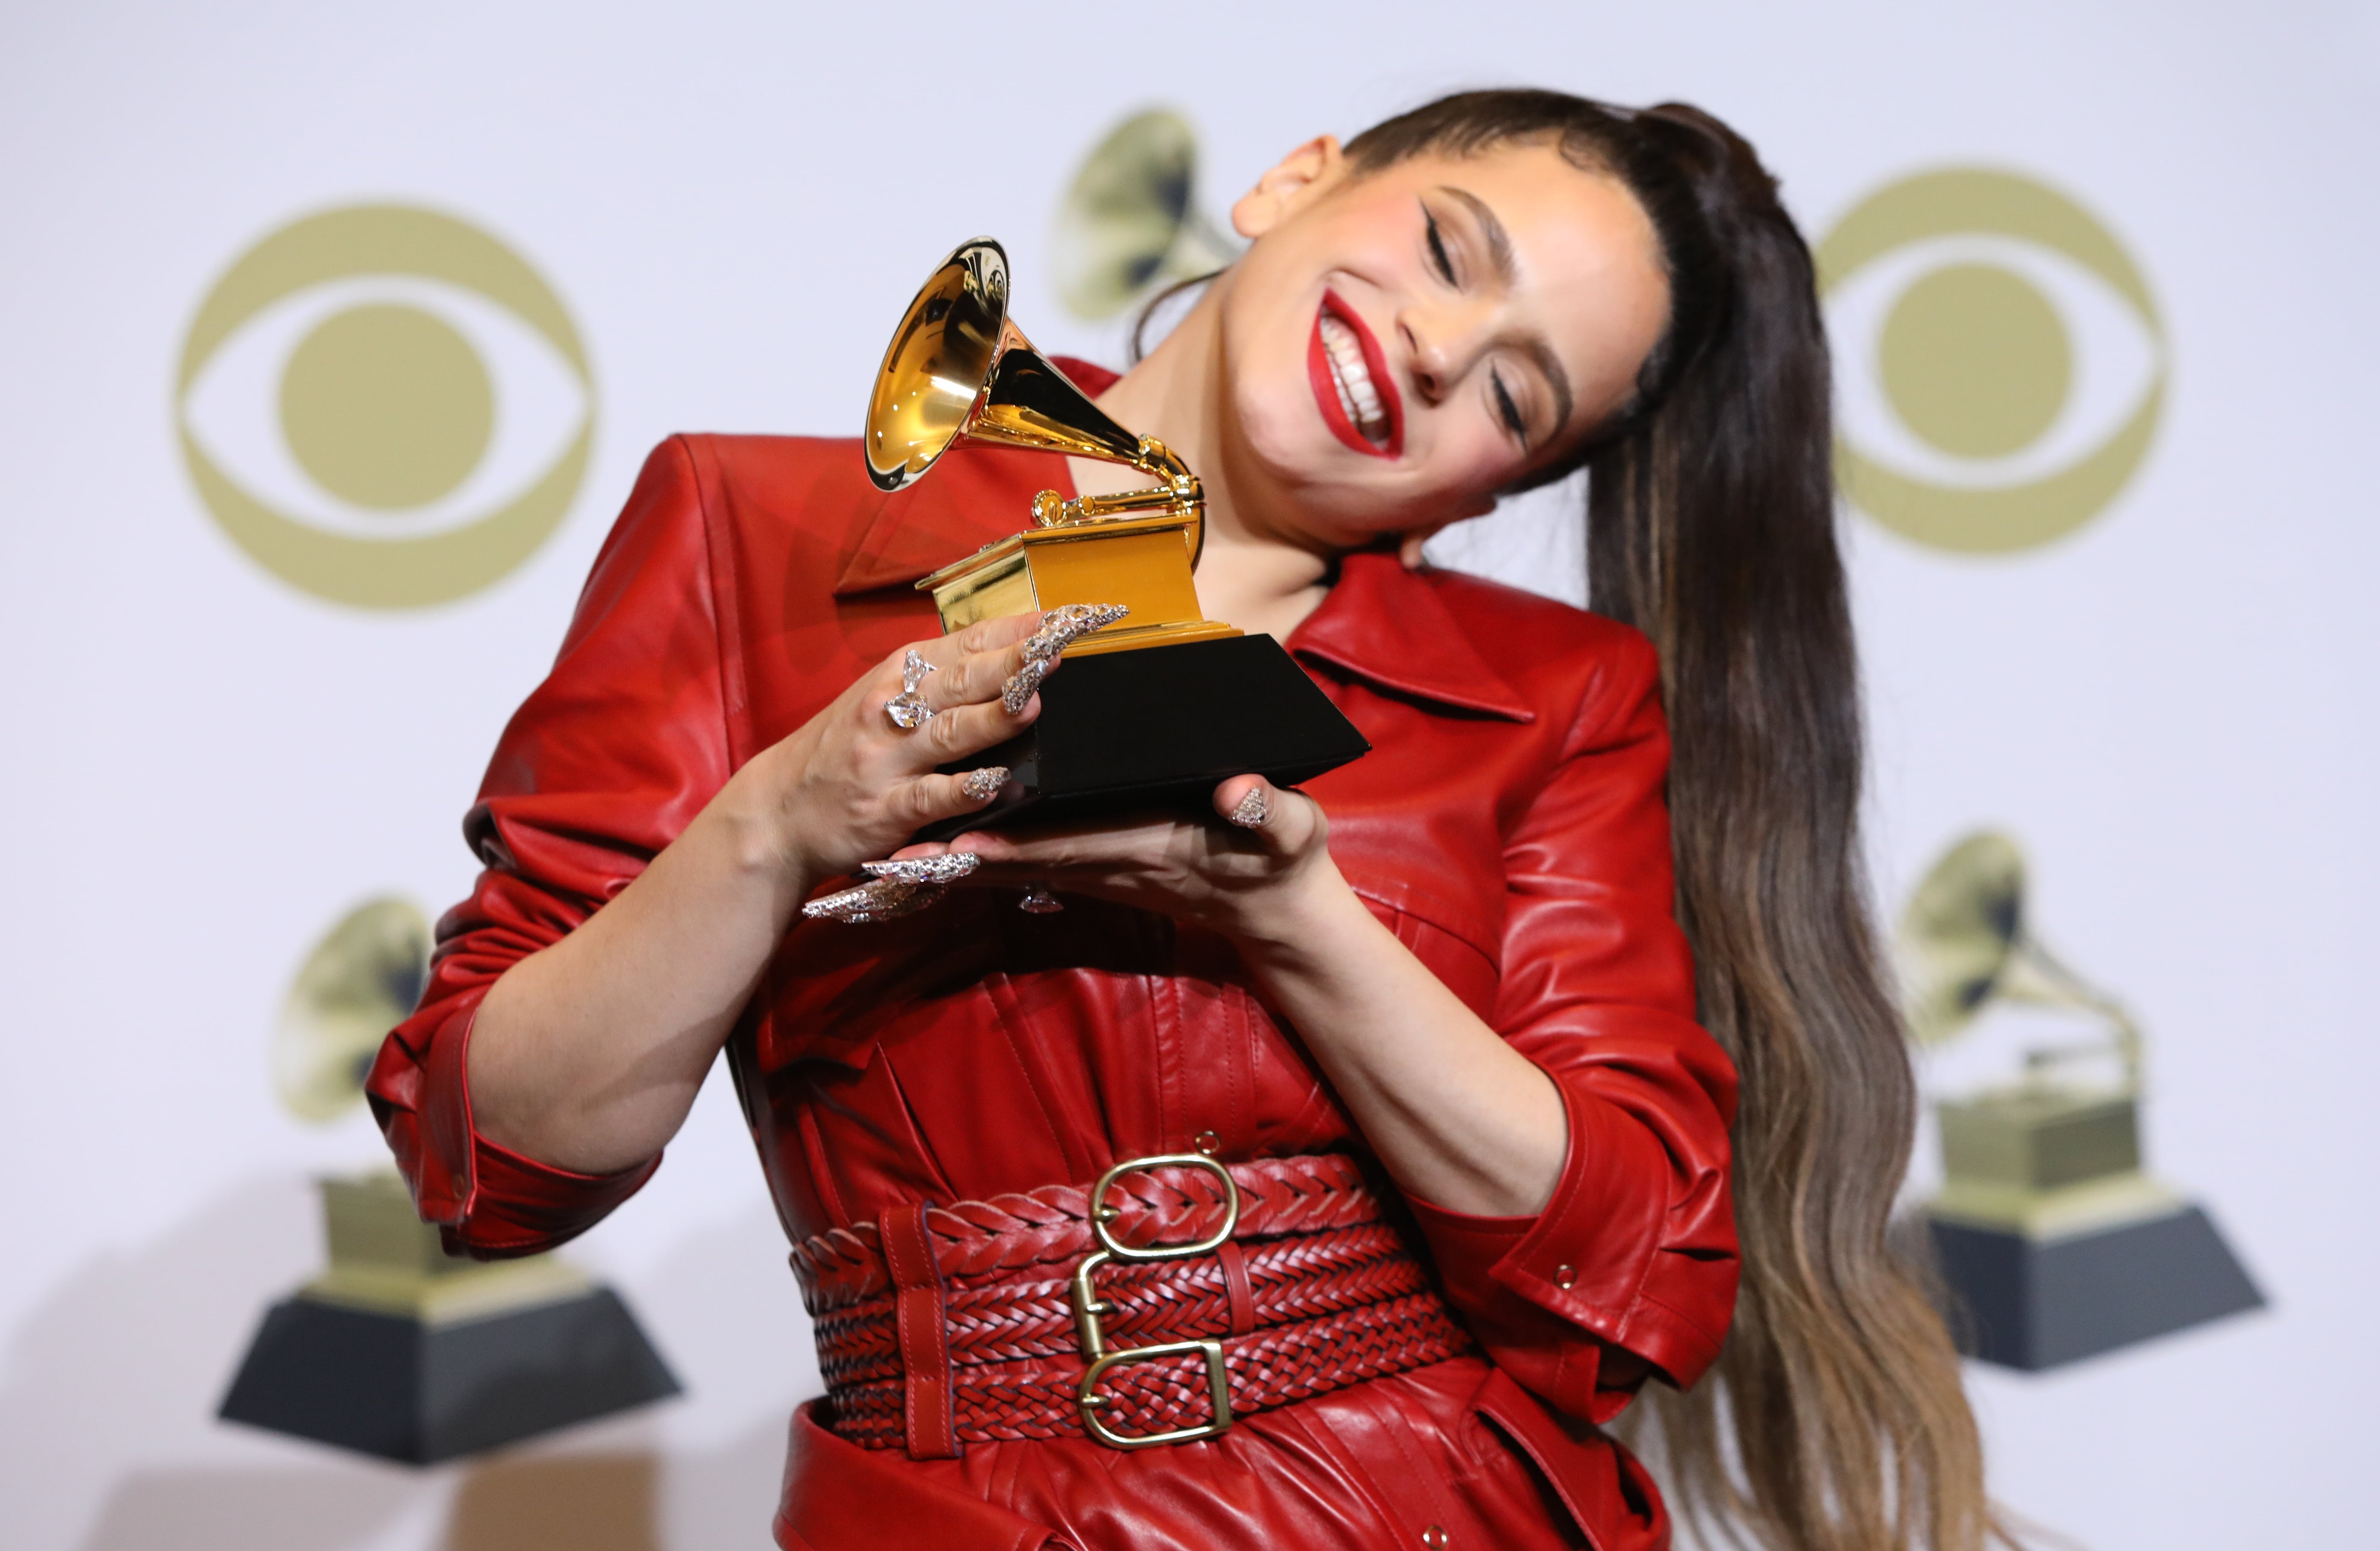 Catalan singer Rosalía poses with her Grammy award upon picking up the honour of Best Latin Rock, Urban or Alternative Album at the 2020 Grammy awards (by REUTERS/Monica Almeida)